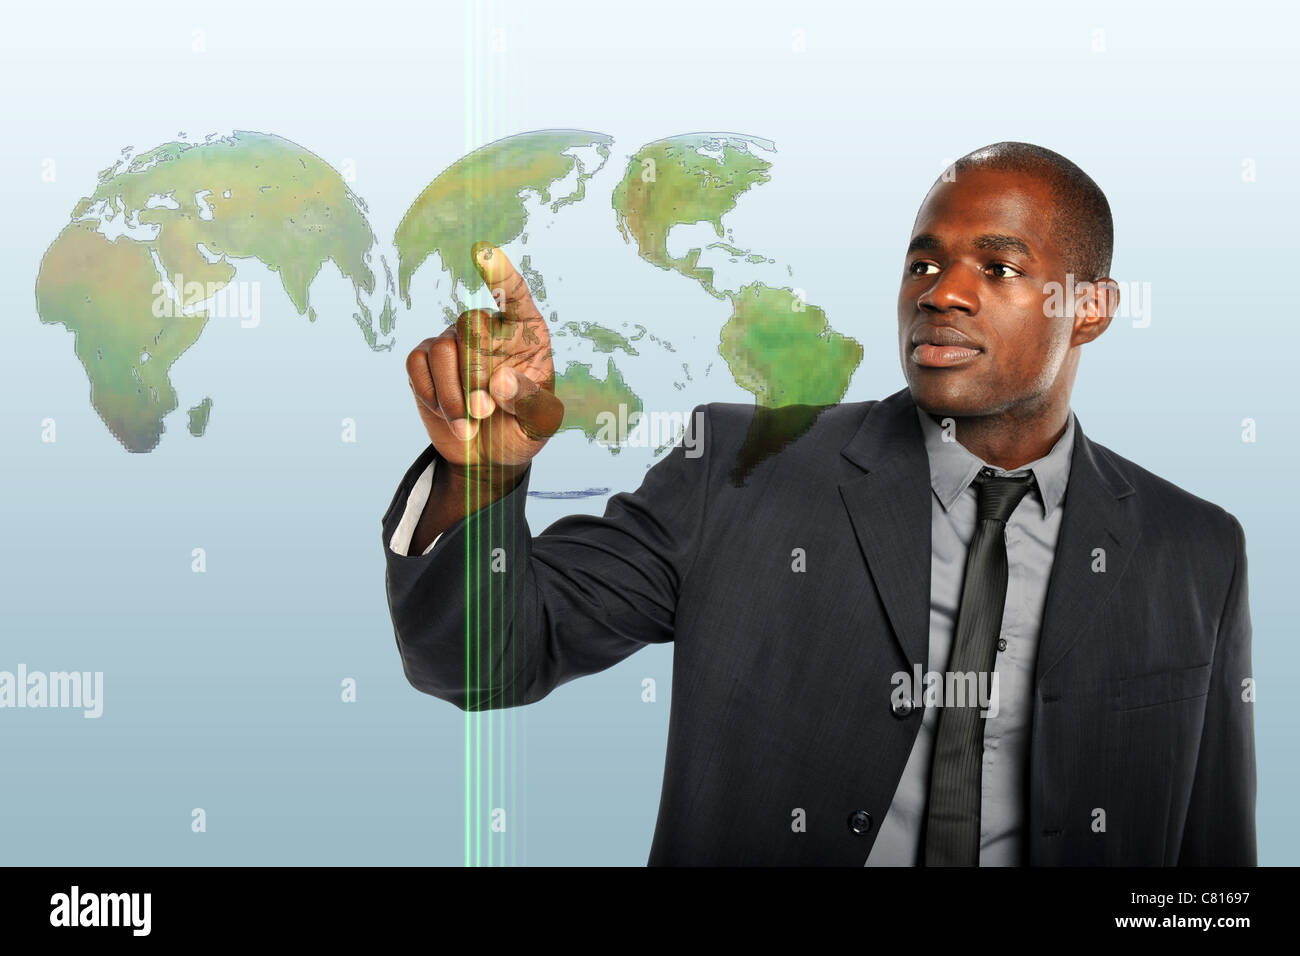 African American businessman touching world map hologram Banque D'Images